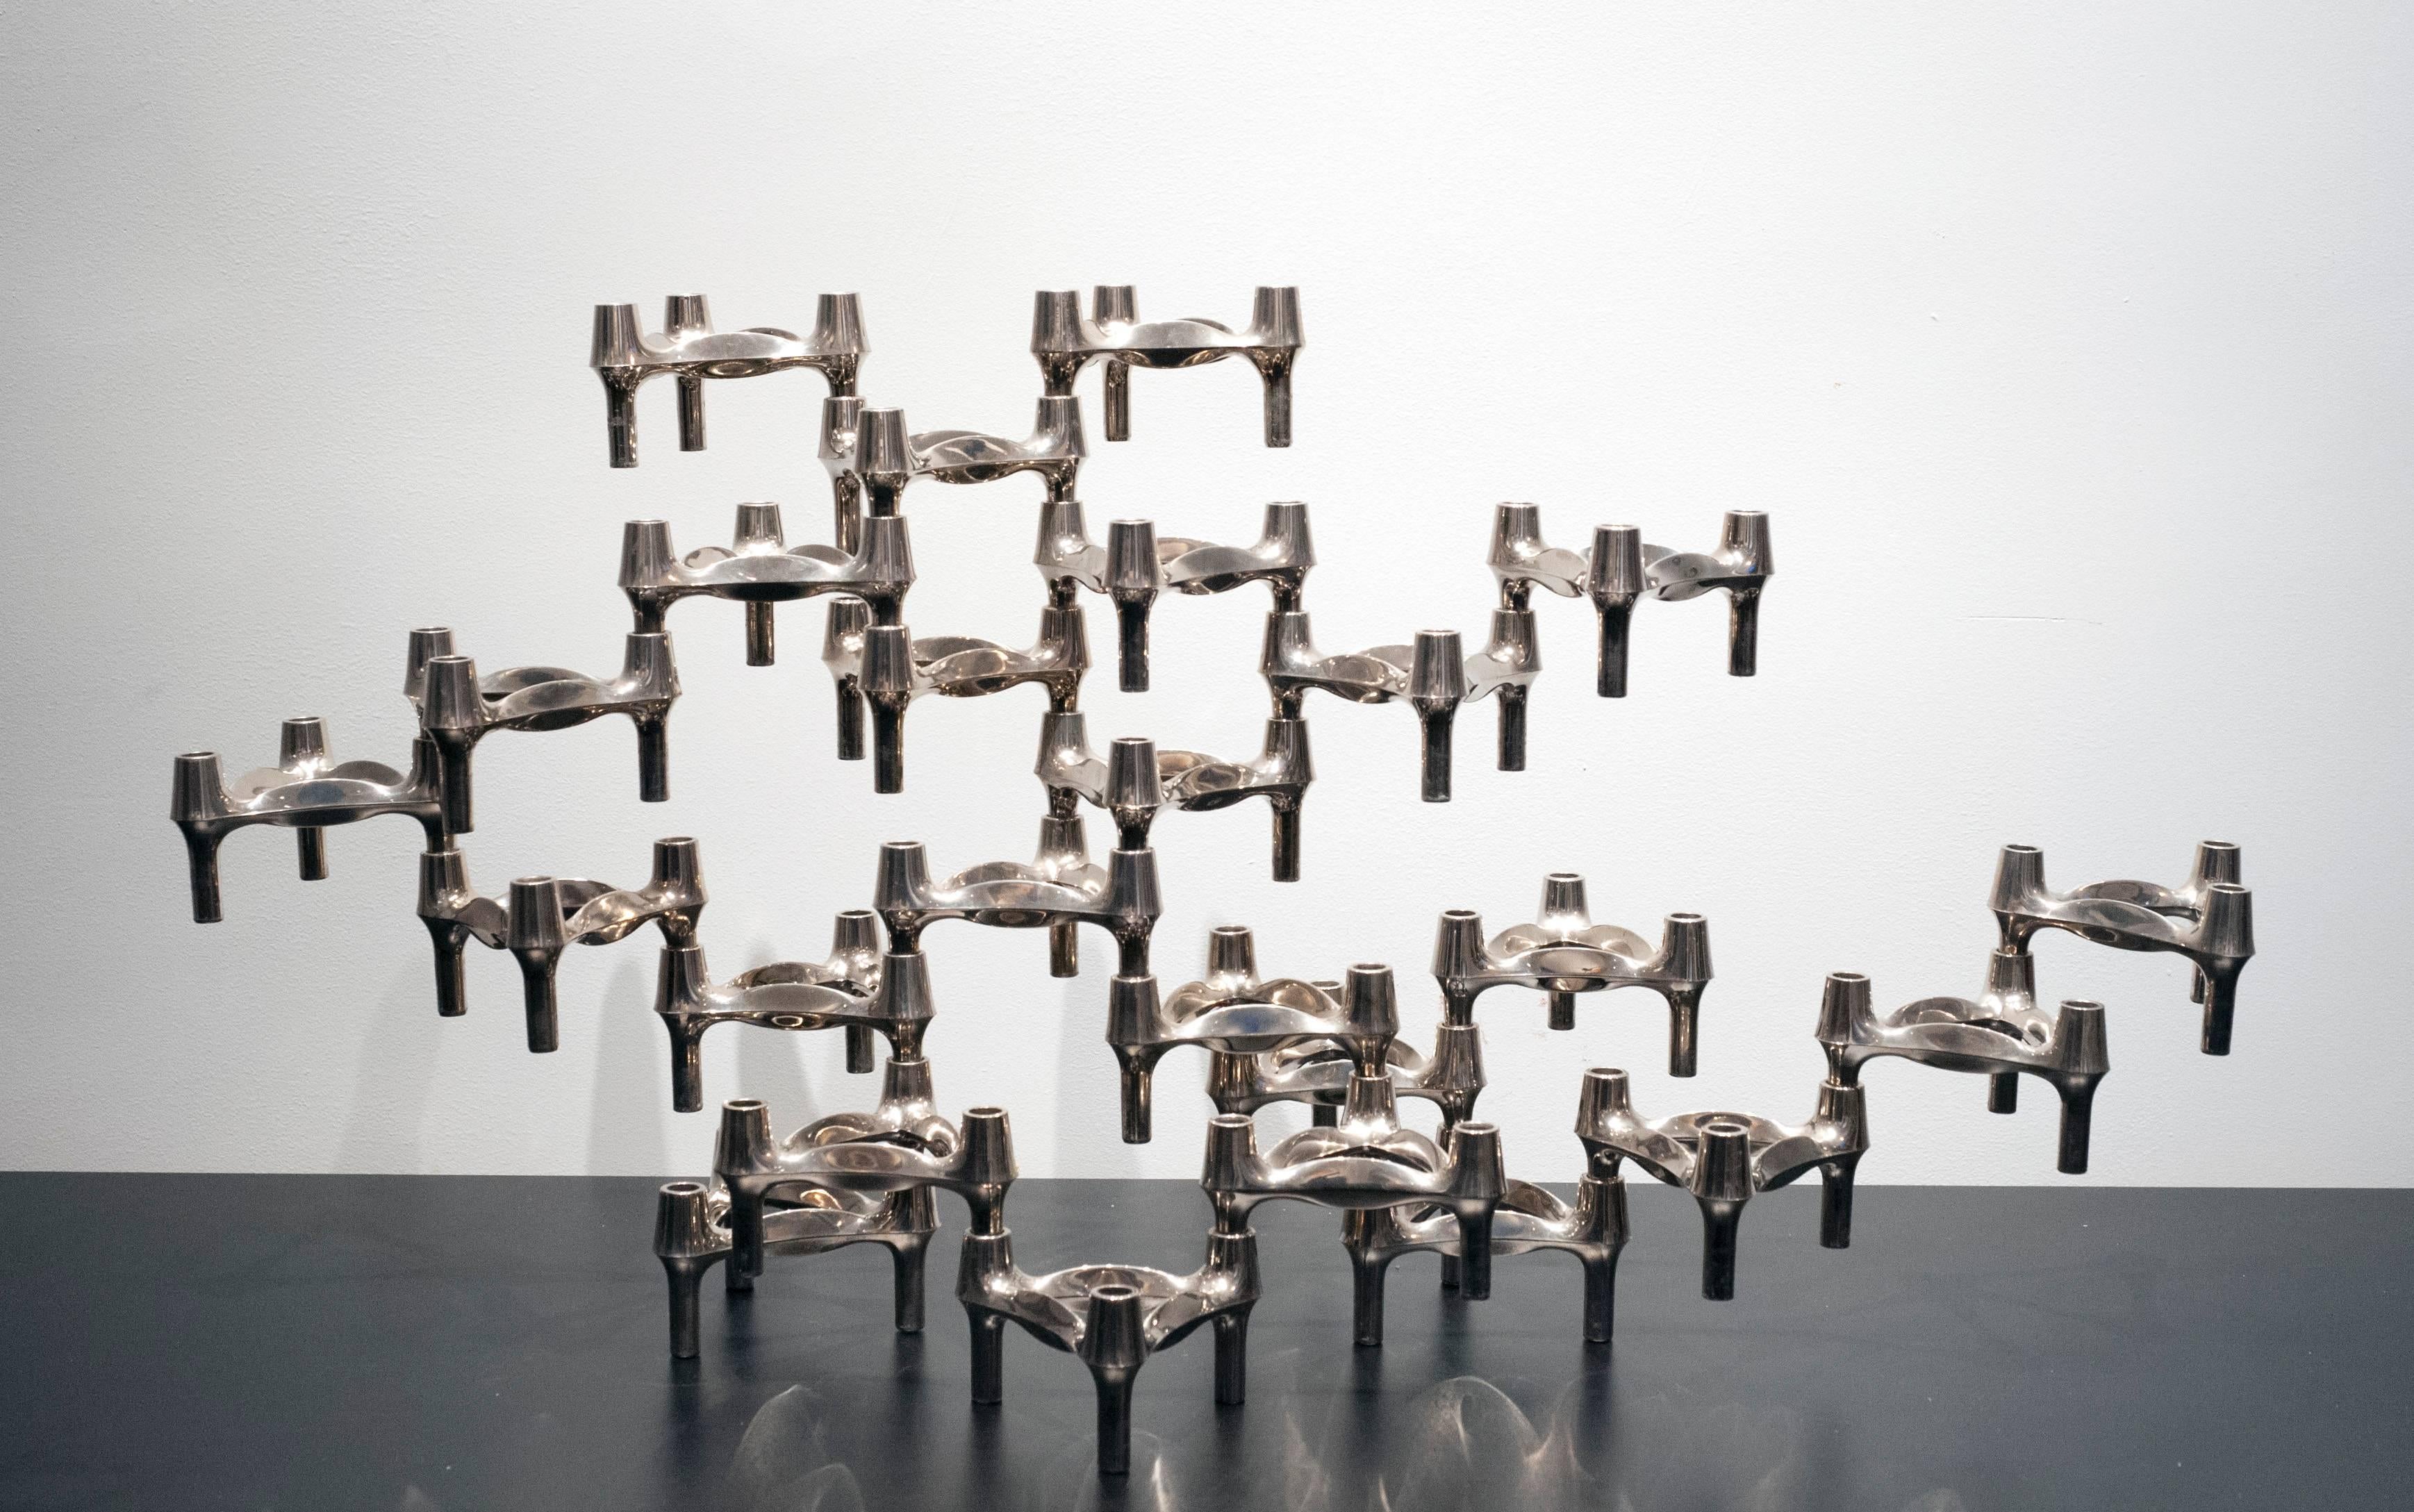 Striking set of 25 Nagel candleholders manufactured by BMF of Germany. Clever inter-locking and stacking design allows for endless configurations.  The sculptural quality makes it a great centrepiece. Quality made of solid chromed nickel. Condition